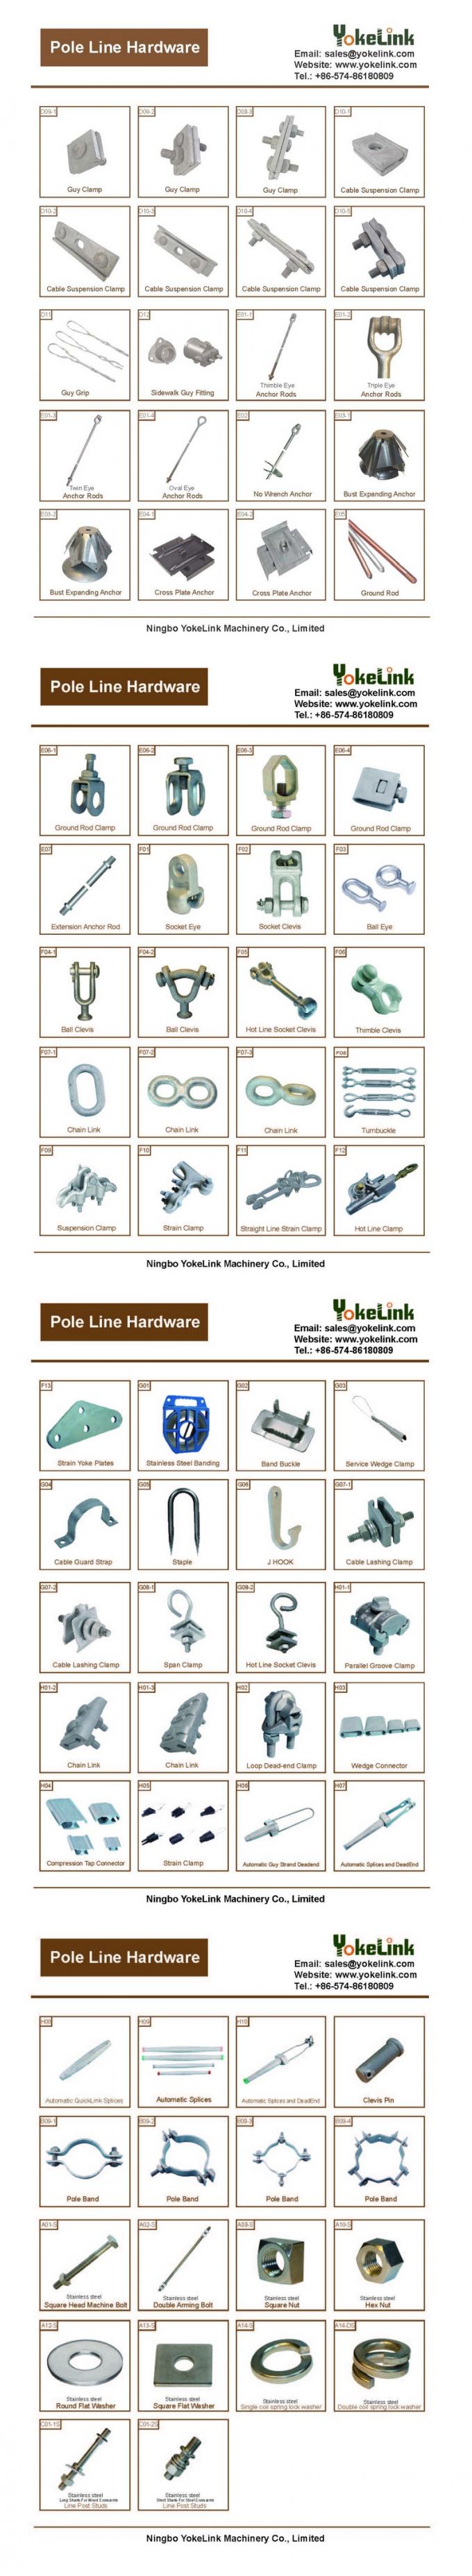 1-7/8” Zinc finish steel Male Post Hinges (Aka Gate Post Hinges)  for Fence Fittings